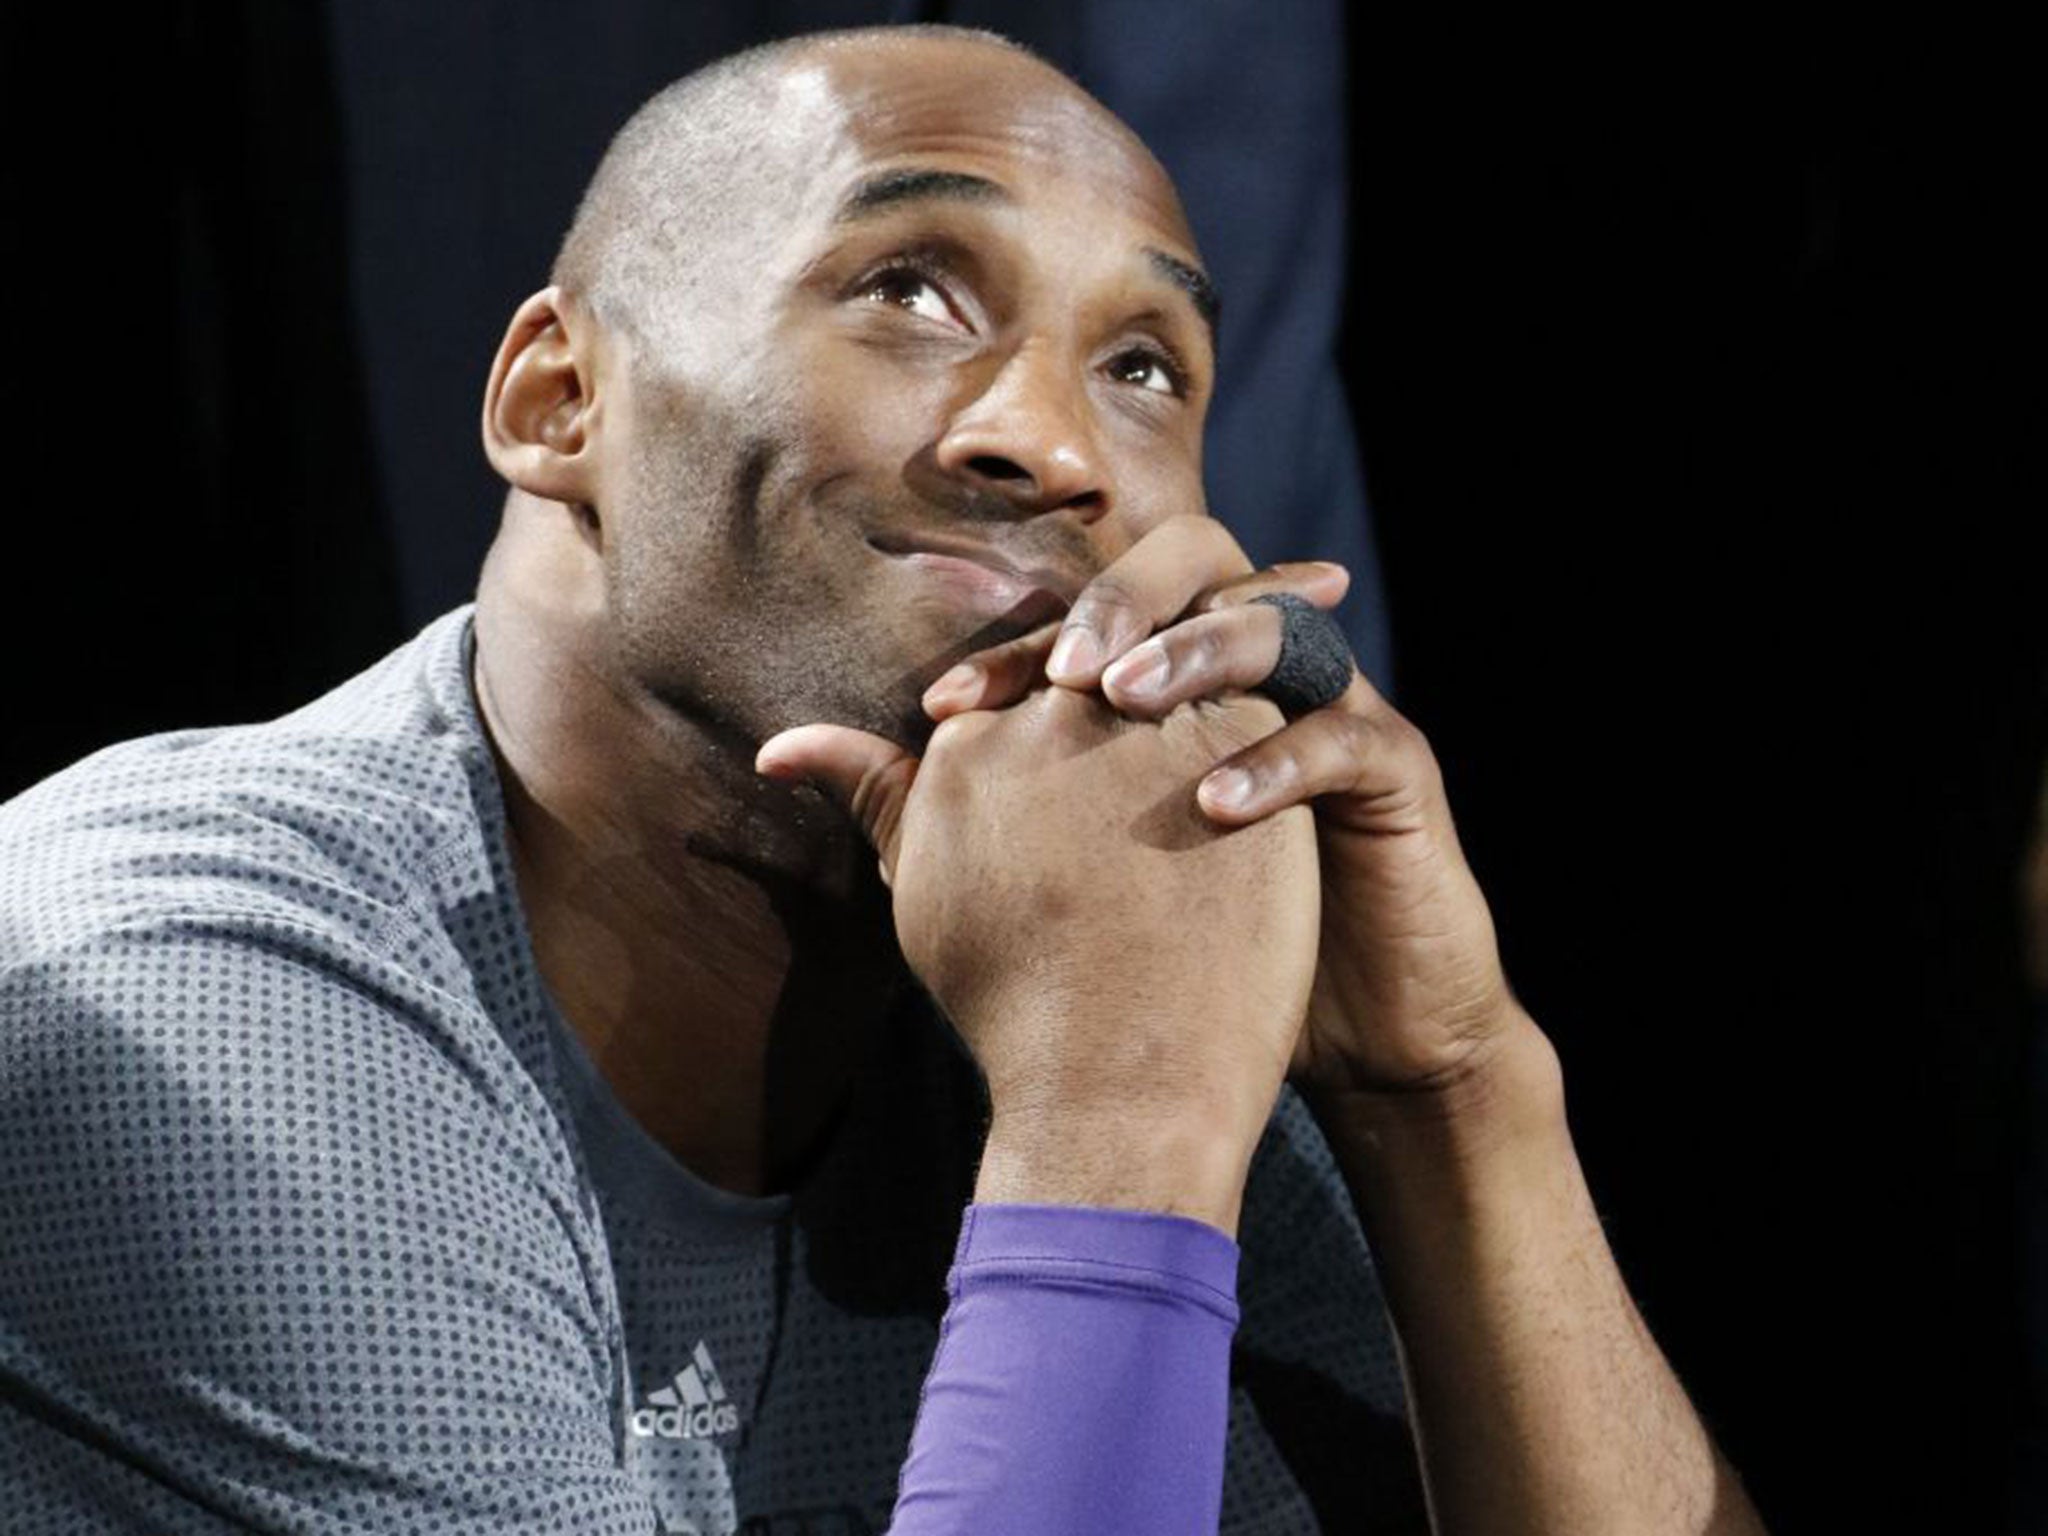 The life of Los Angeles Lakers legend Kobe Bryant told through his